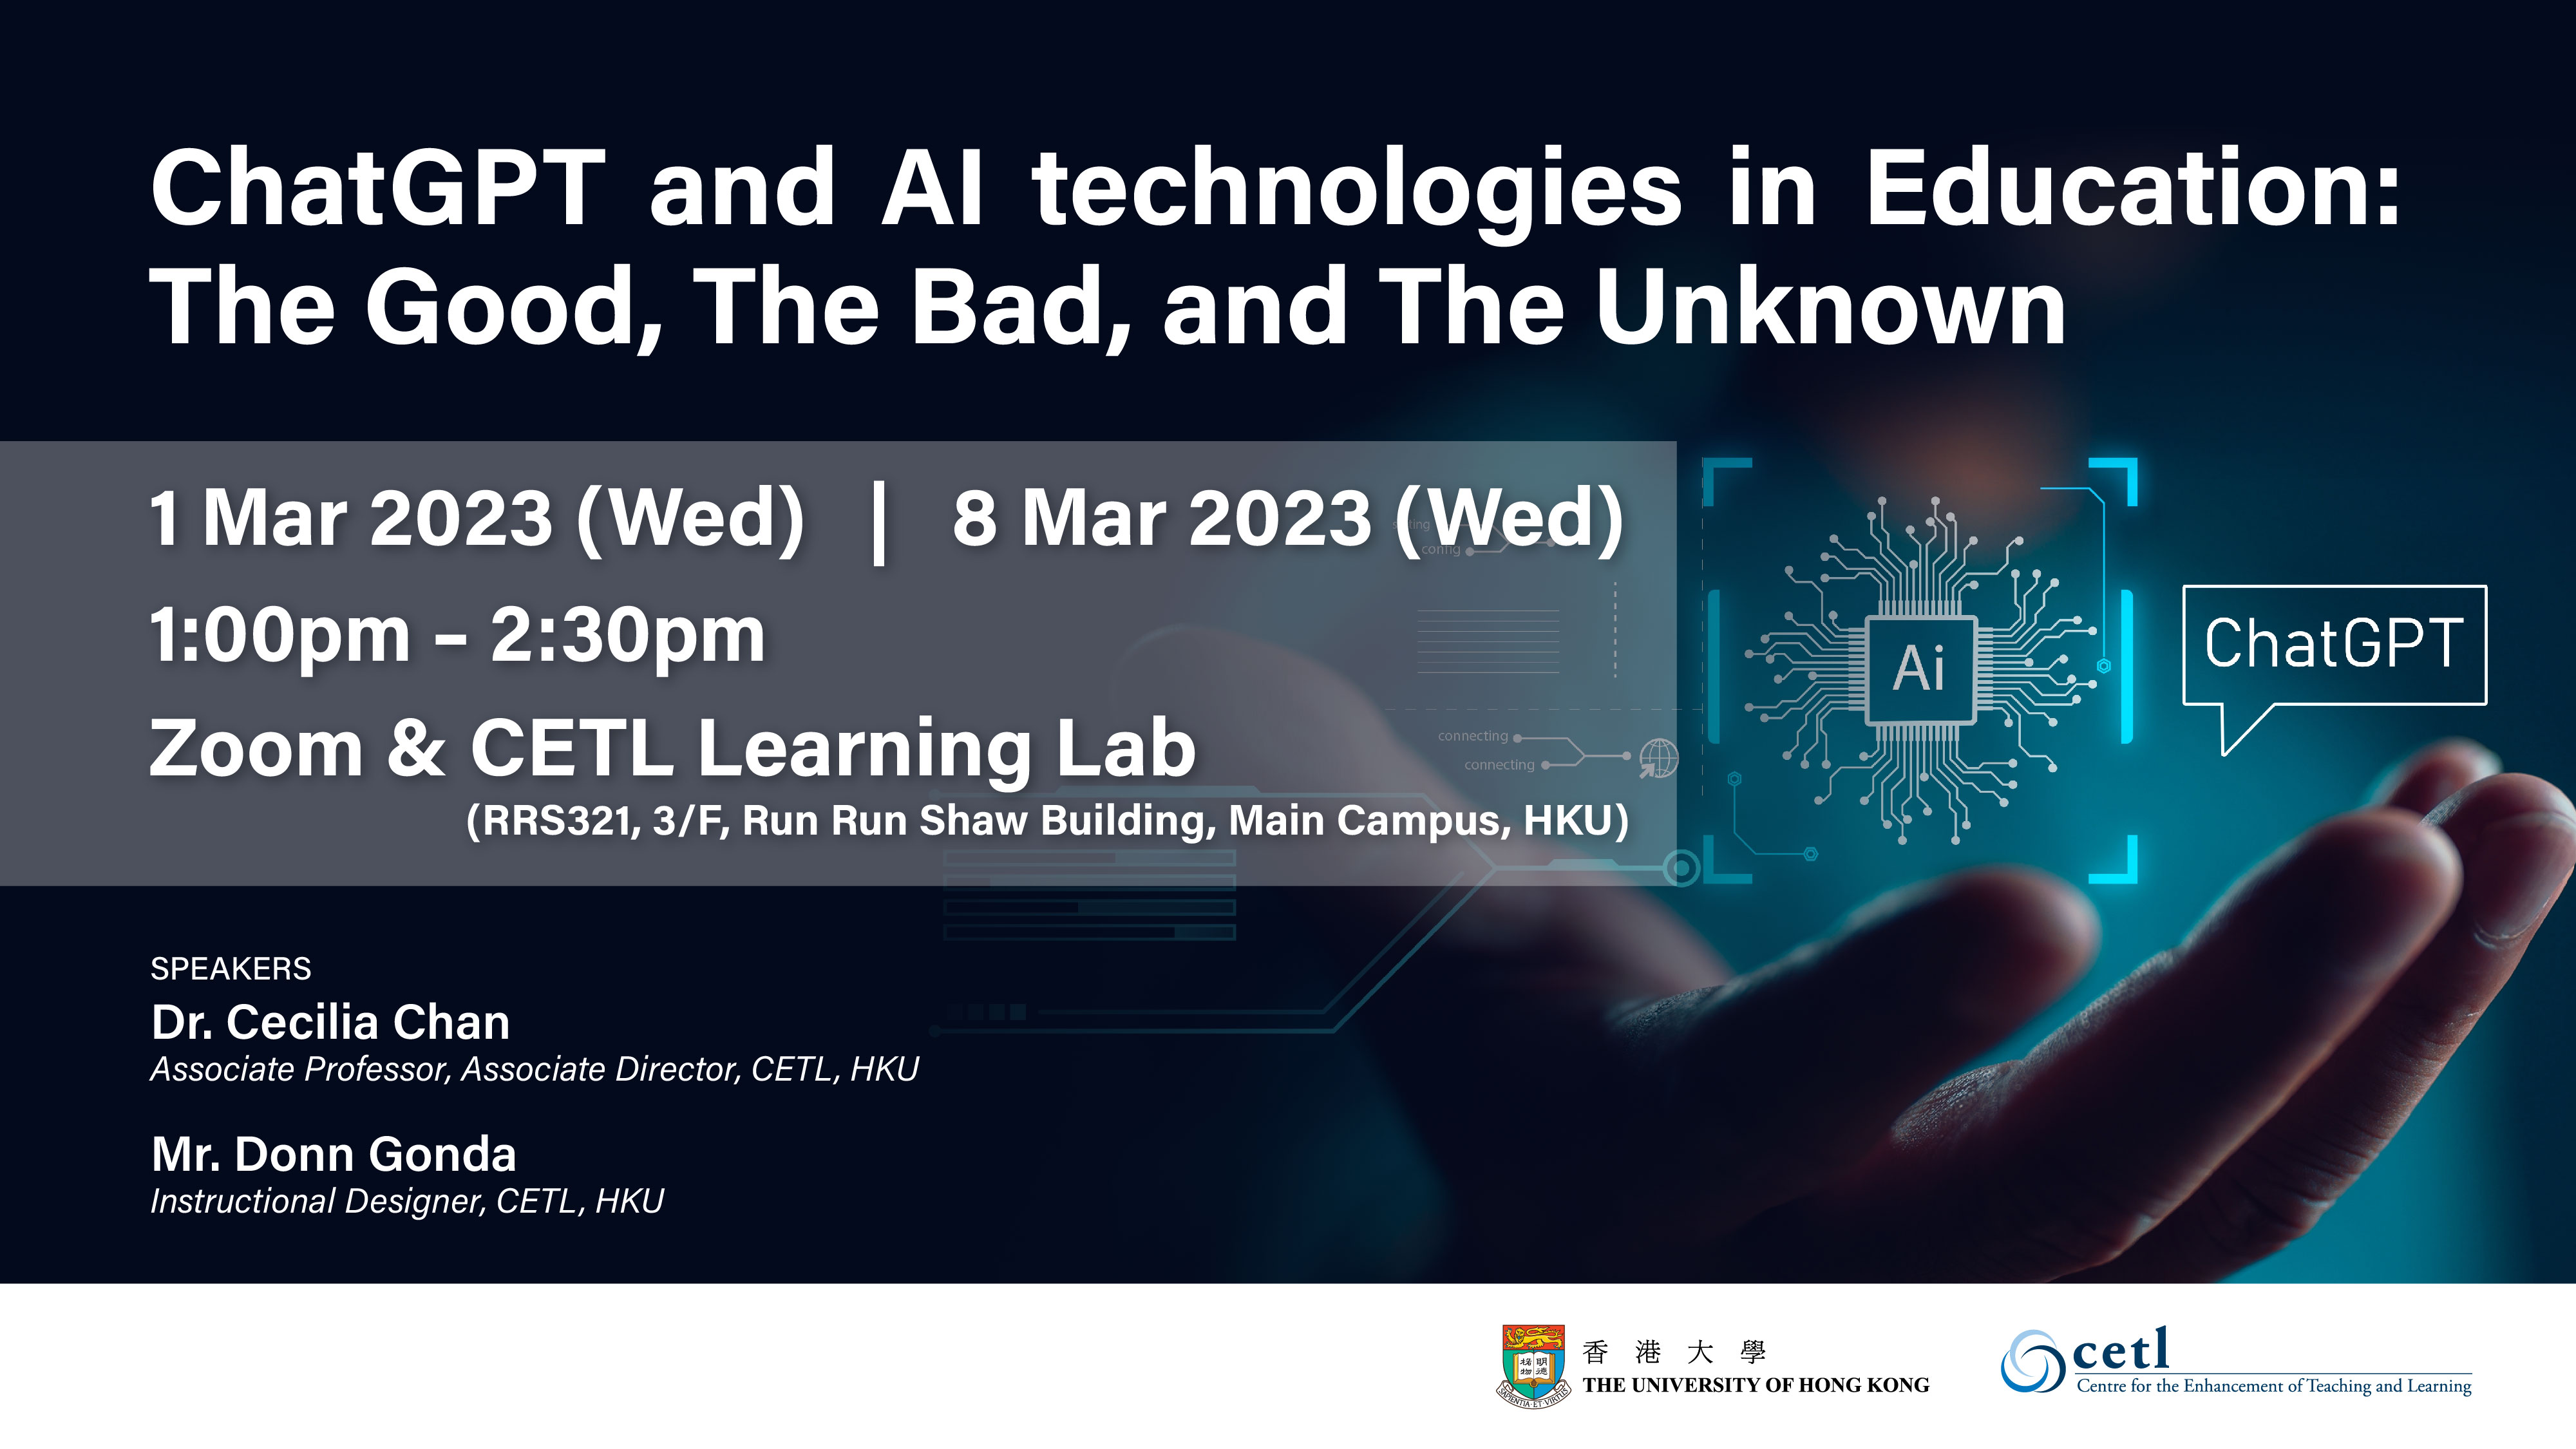 ChatGPT and AI technologies in Education: The Good, The Bad, and The Unknown